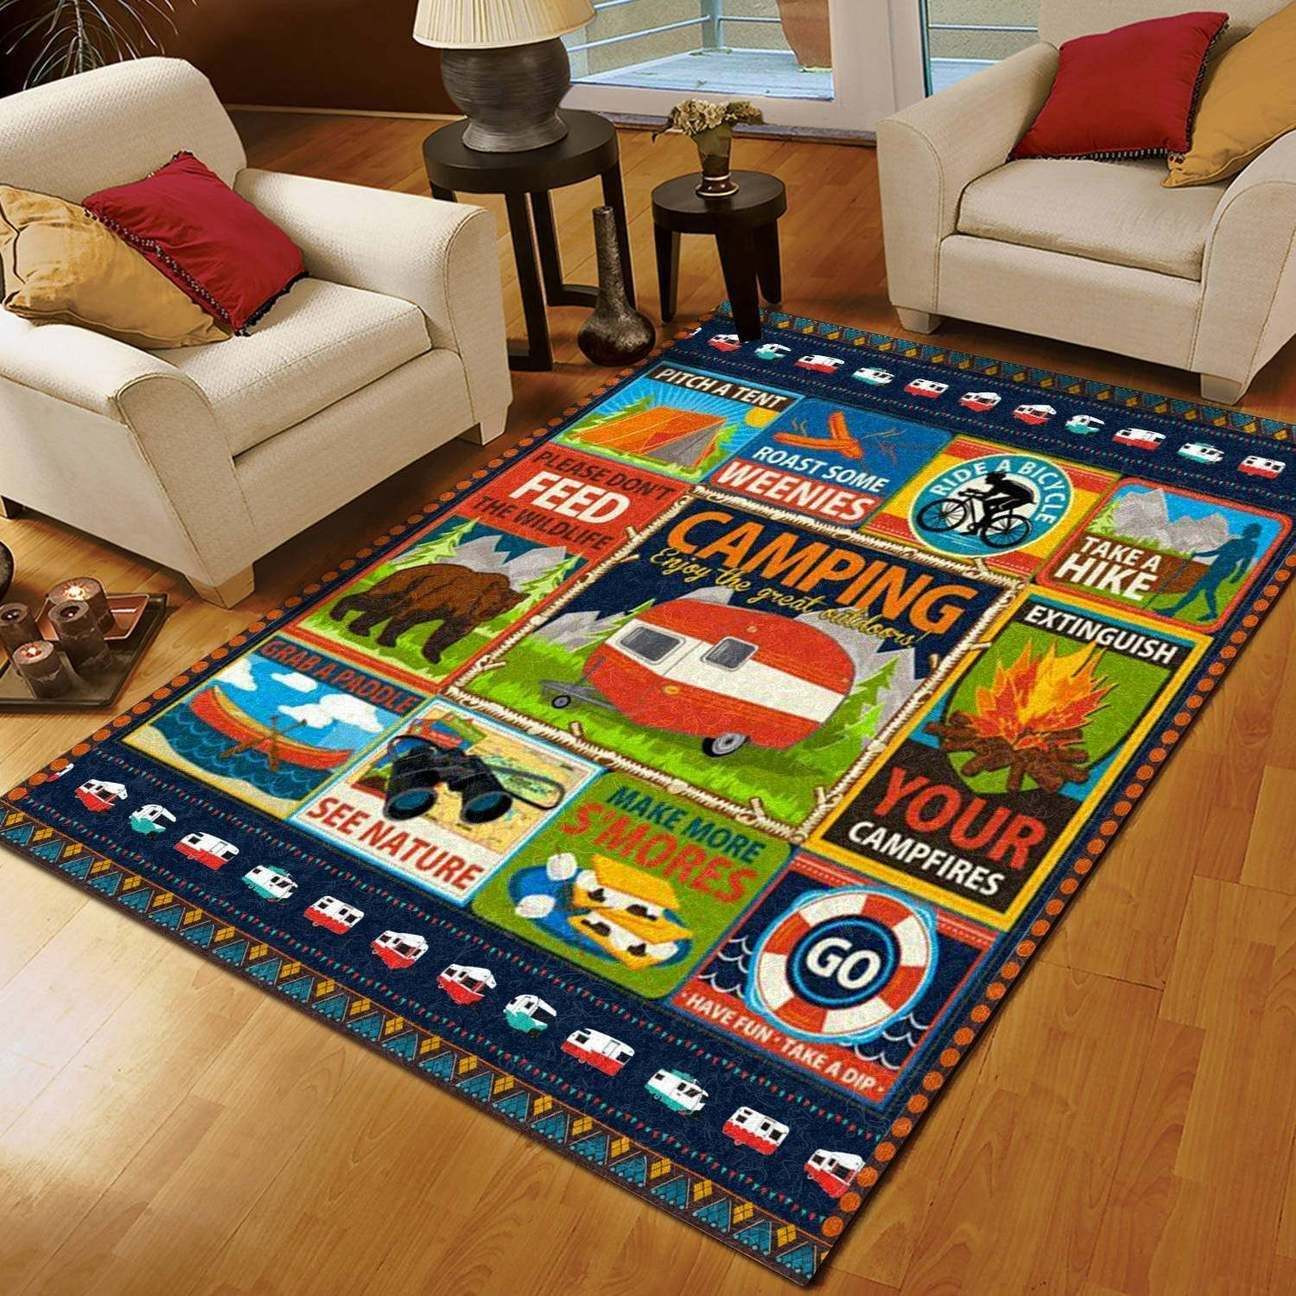 Camping Outdoor Rugs Home Decor